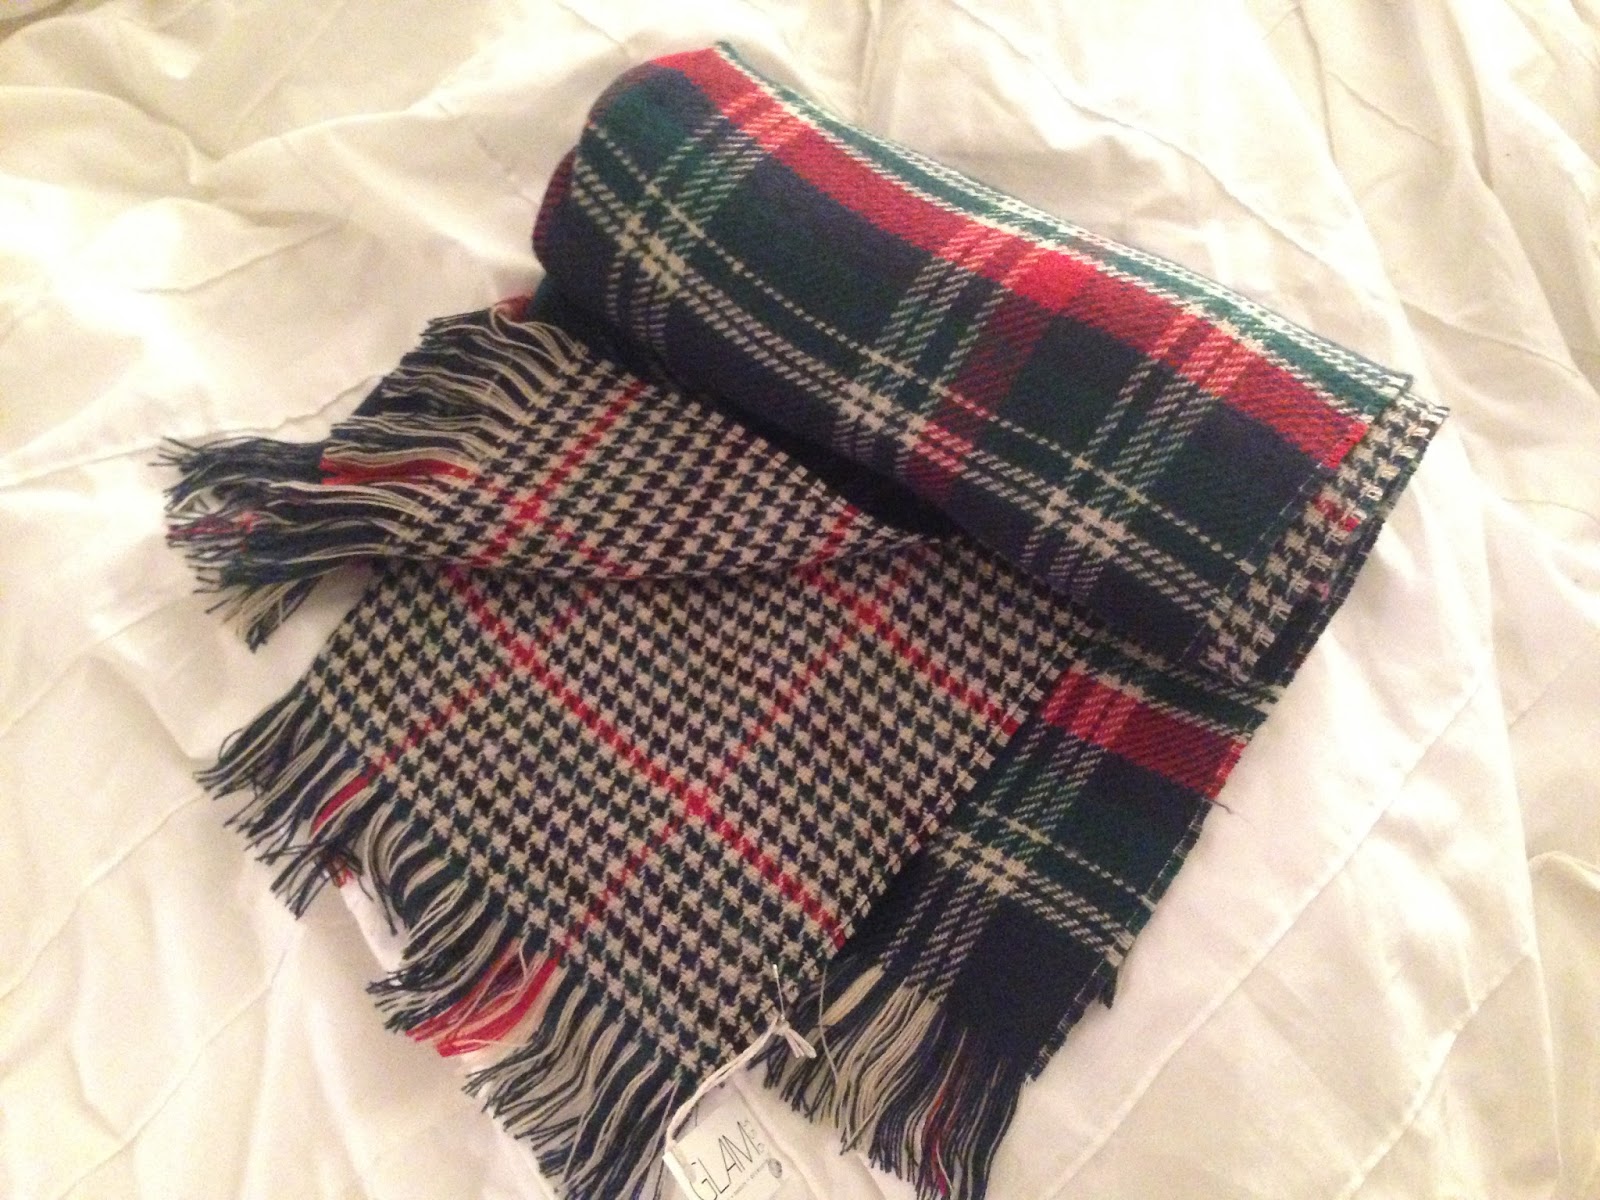 X-tremely V: Annual Scarf Exchange